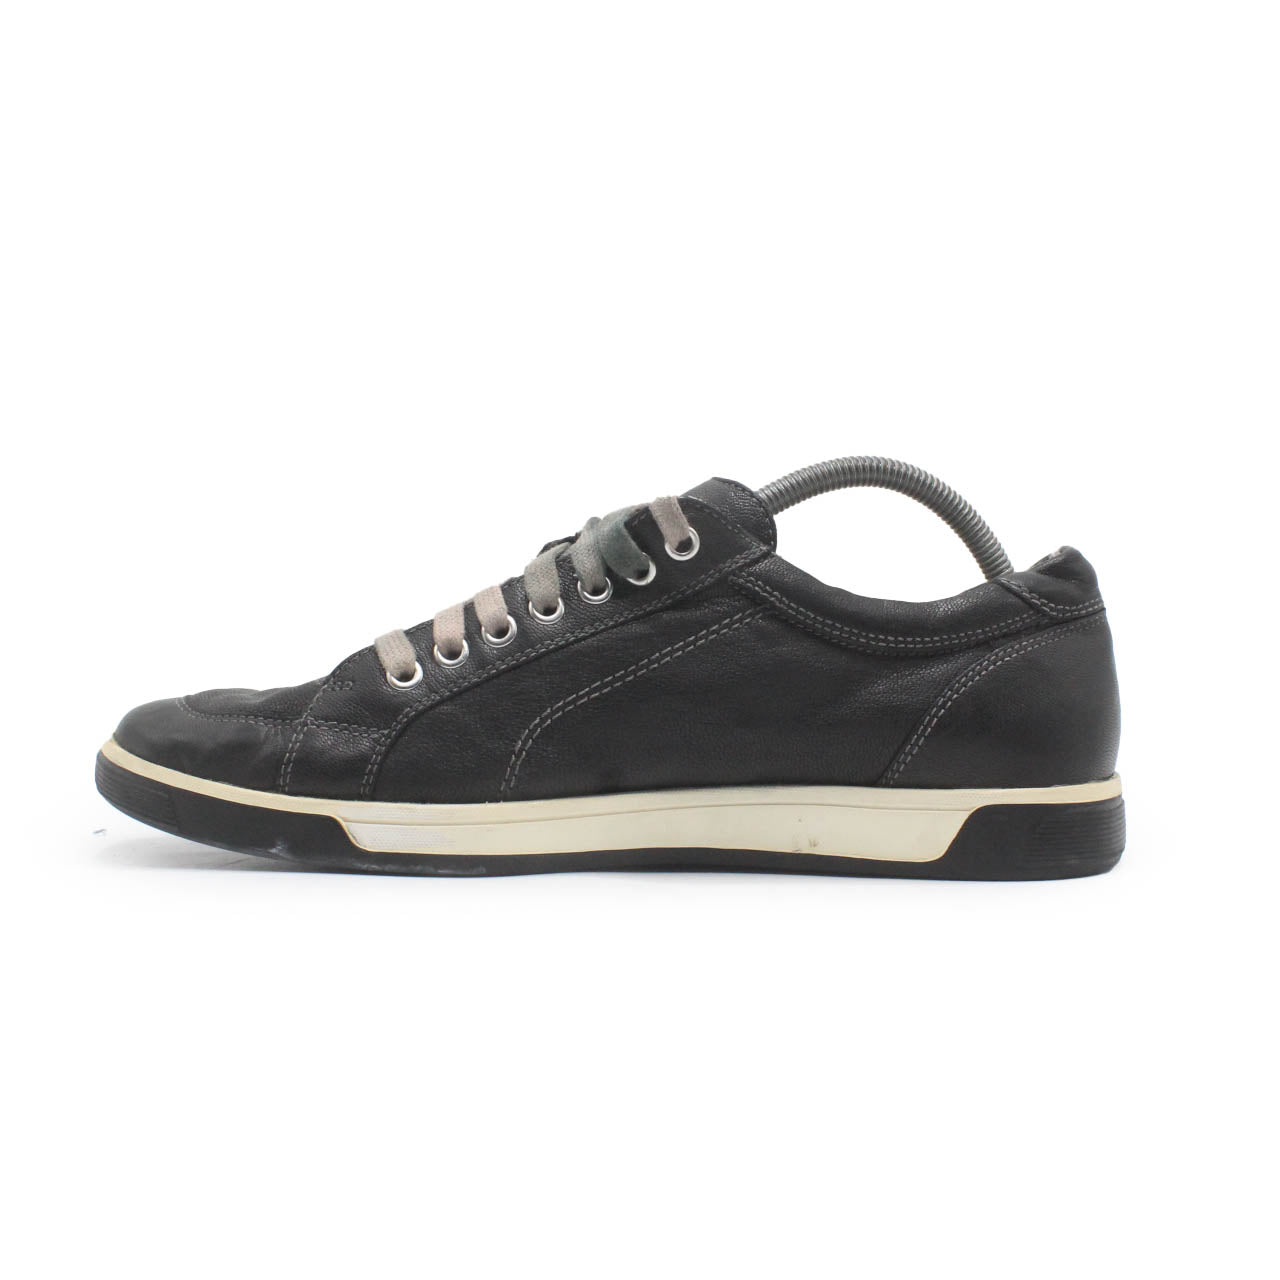 Cole Haan Air Quincy Court Black Leather Casual Shoe